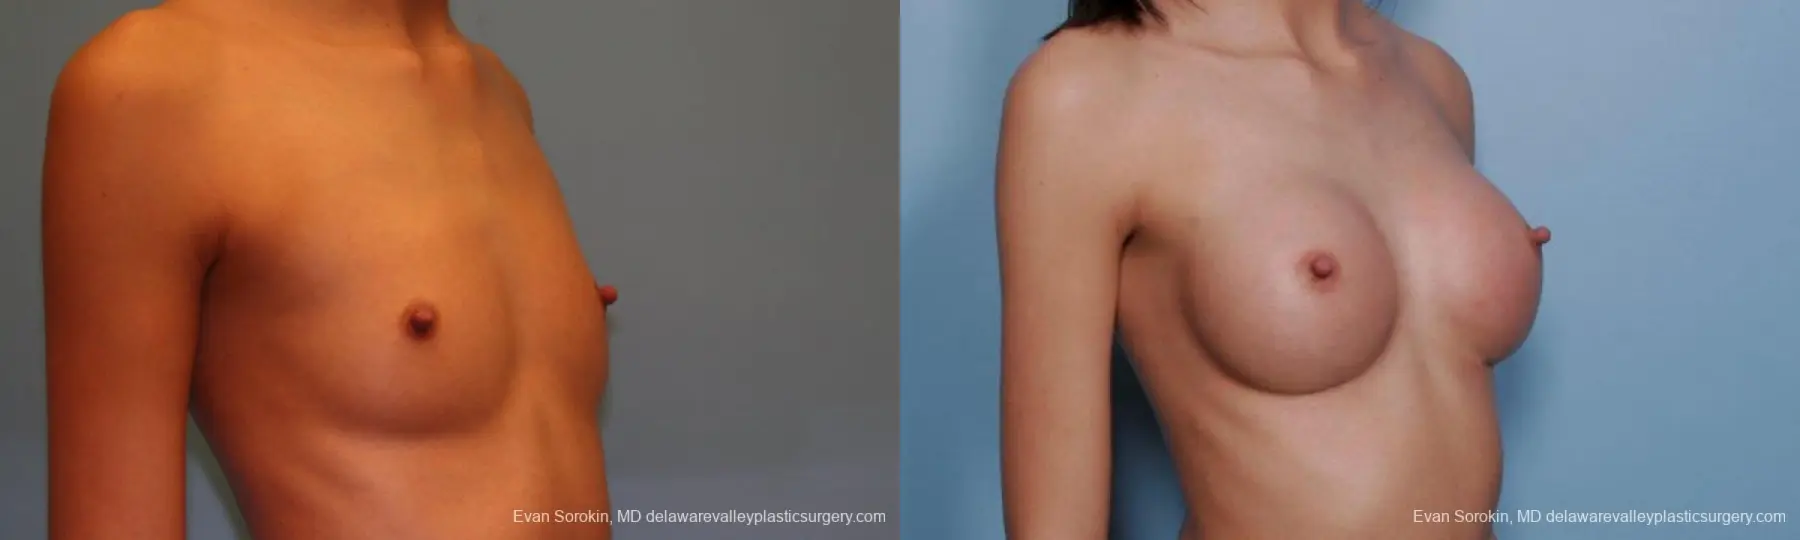 Philadelphia Breast Augmentation 9377 - Before and After 2